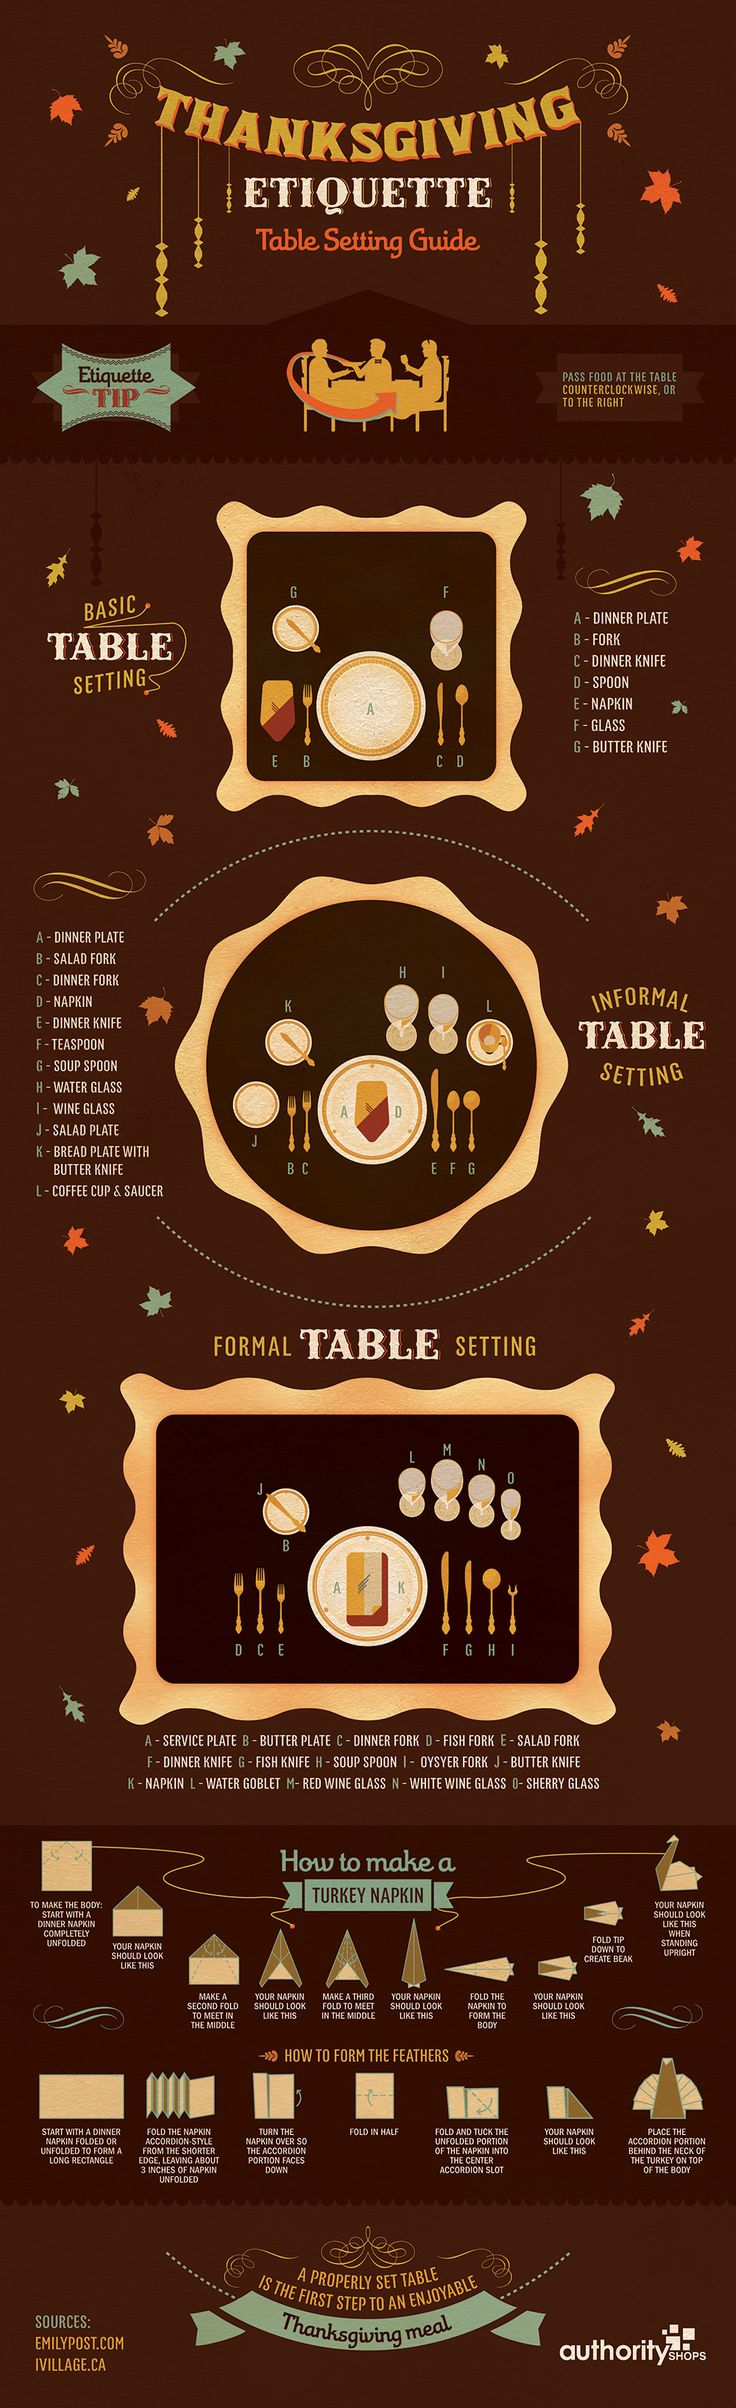 SETTING THE TABLE